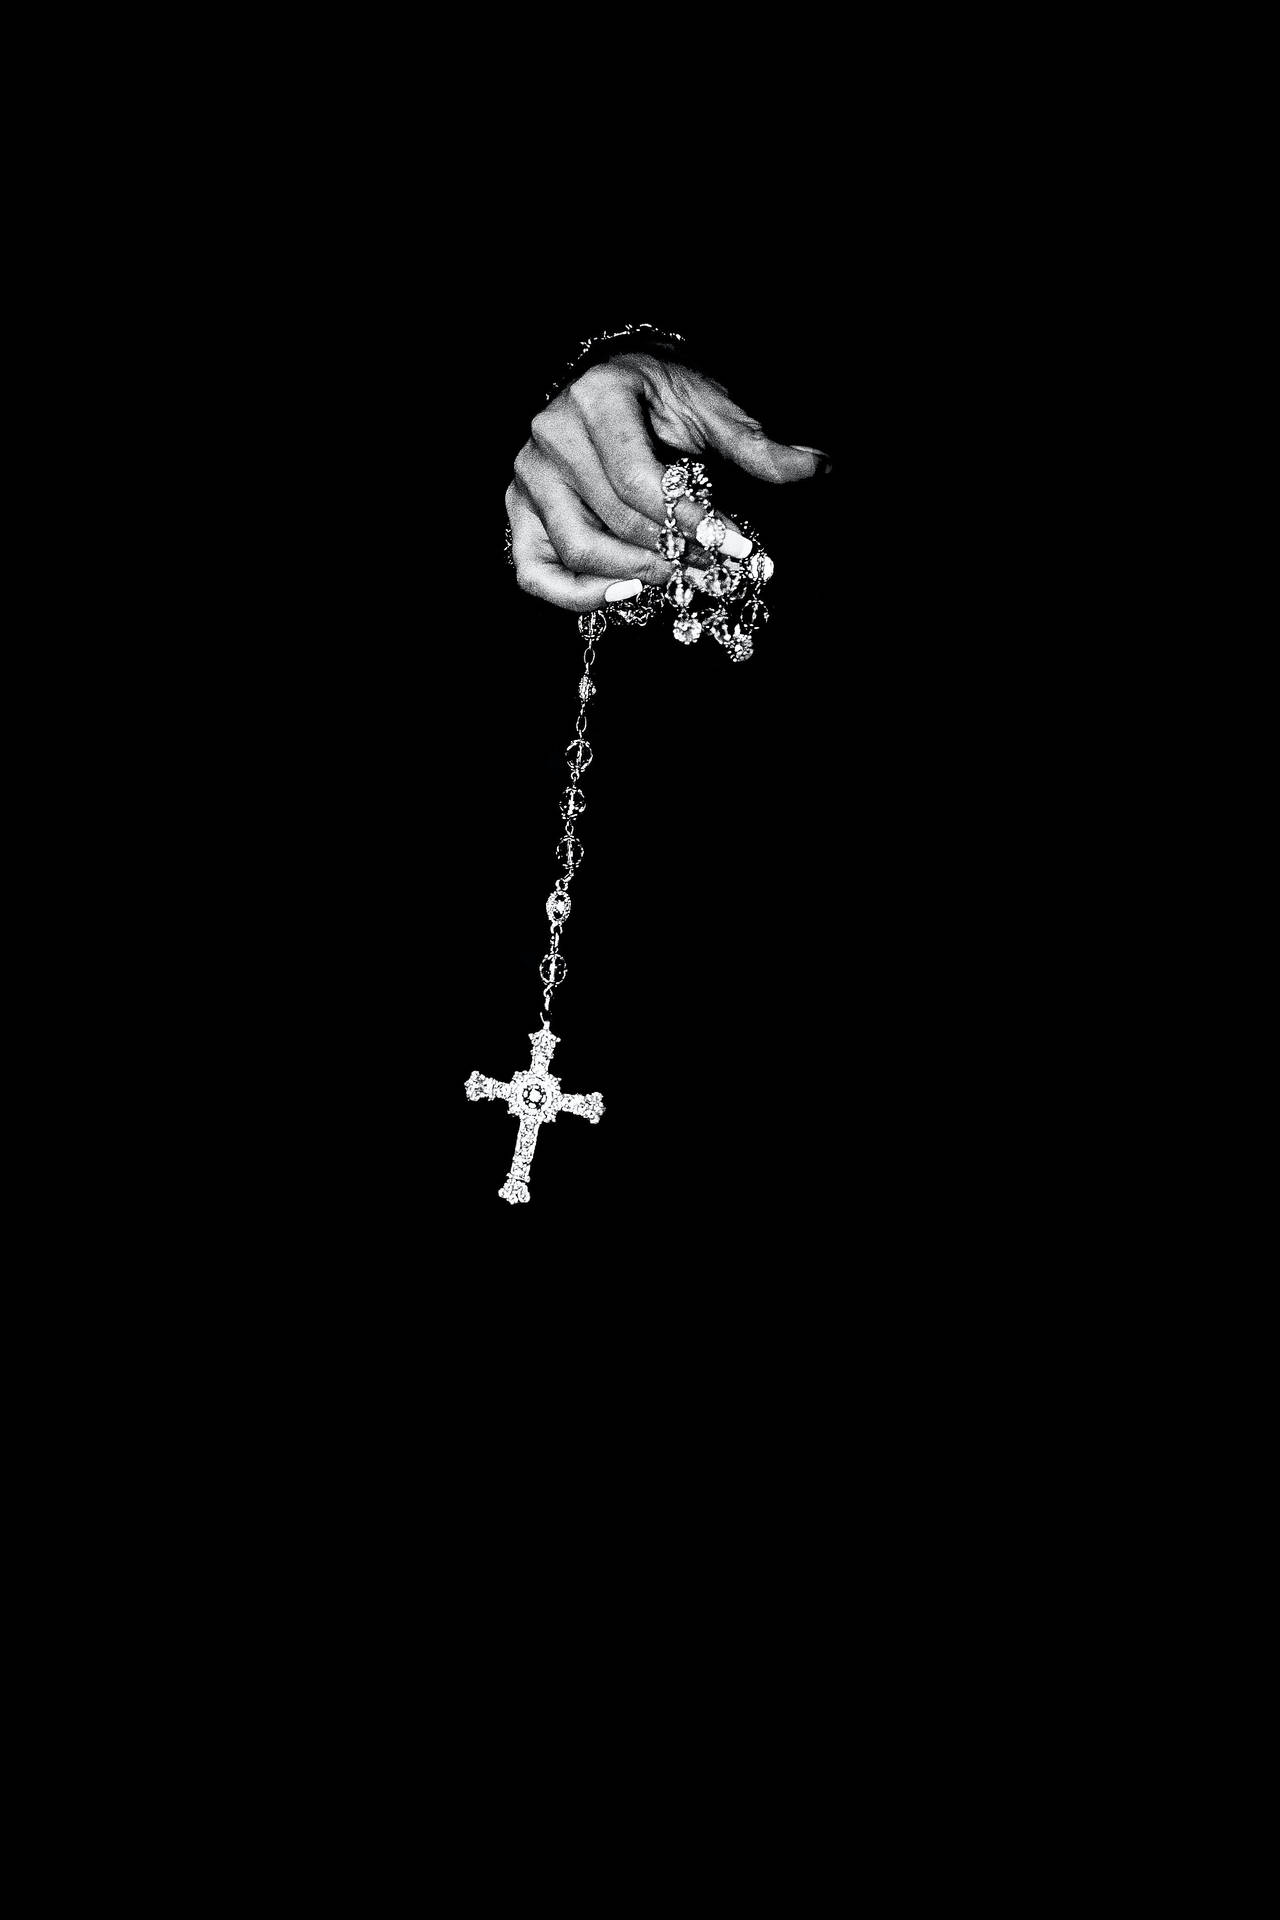 Person Holding Rosary Black Phone Wallpaper